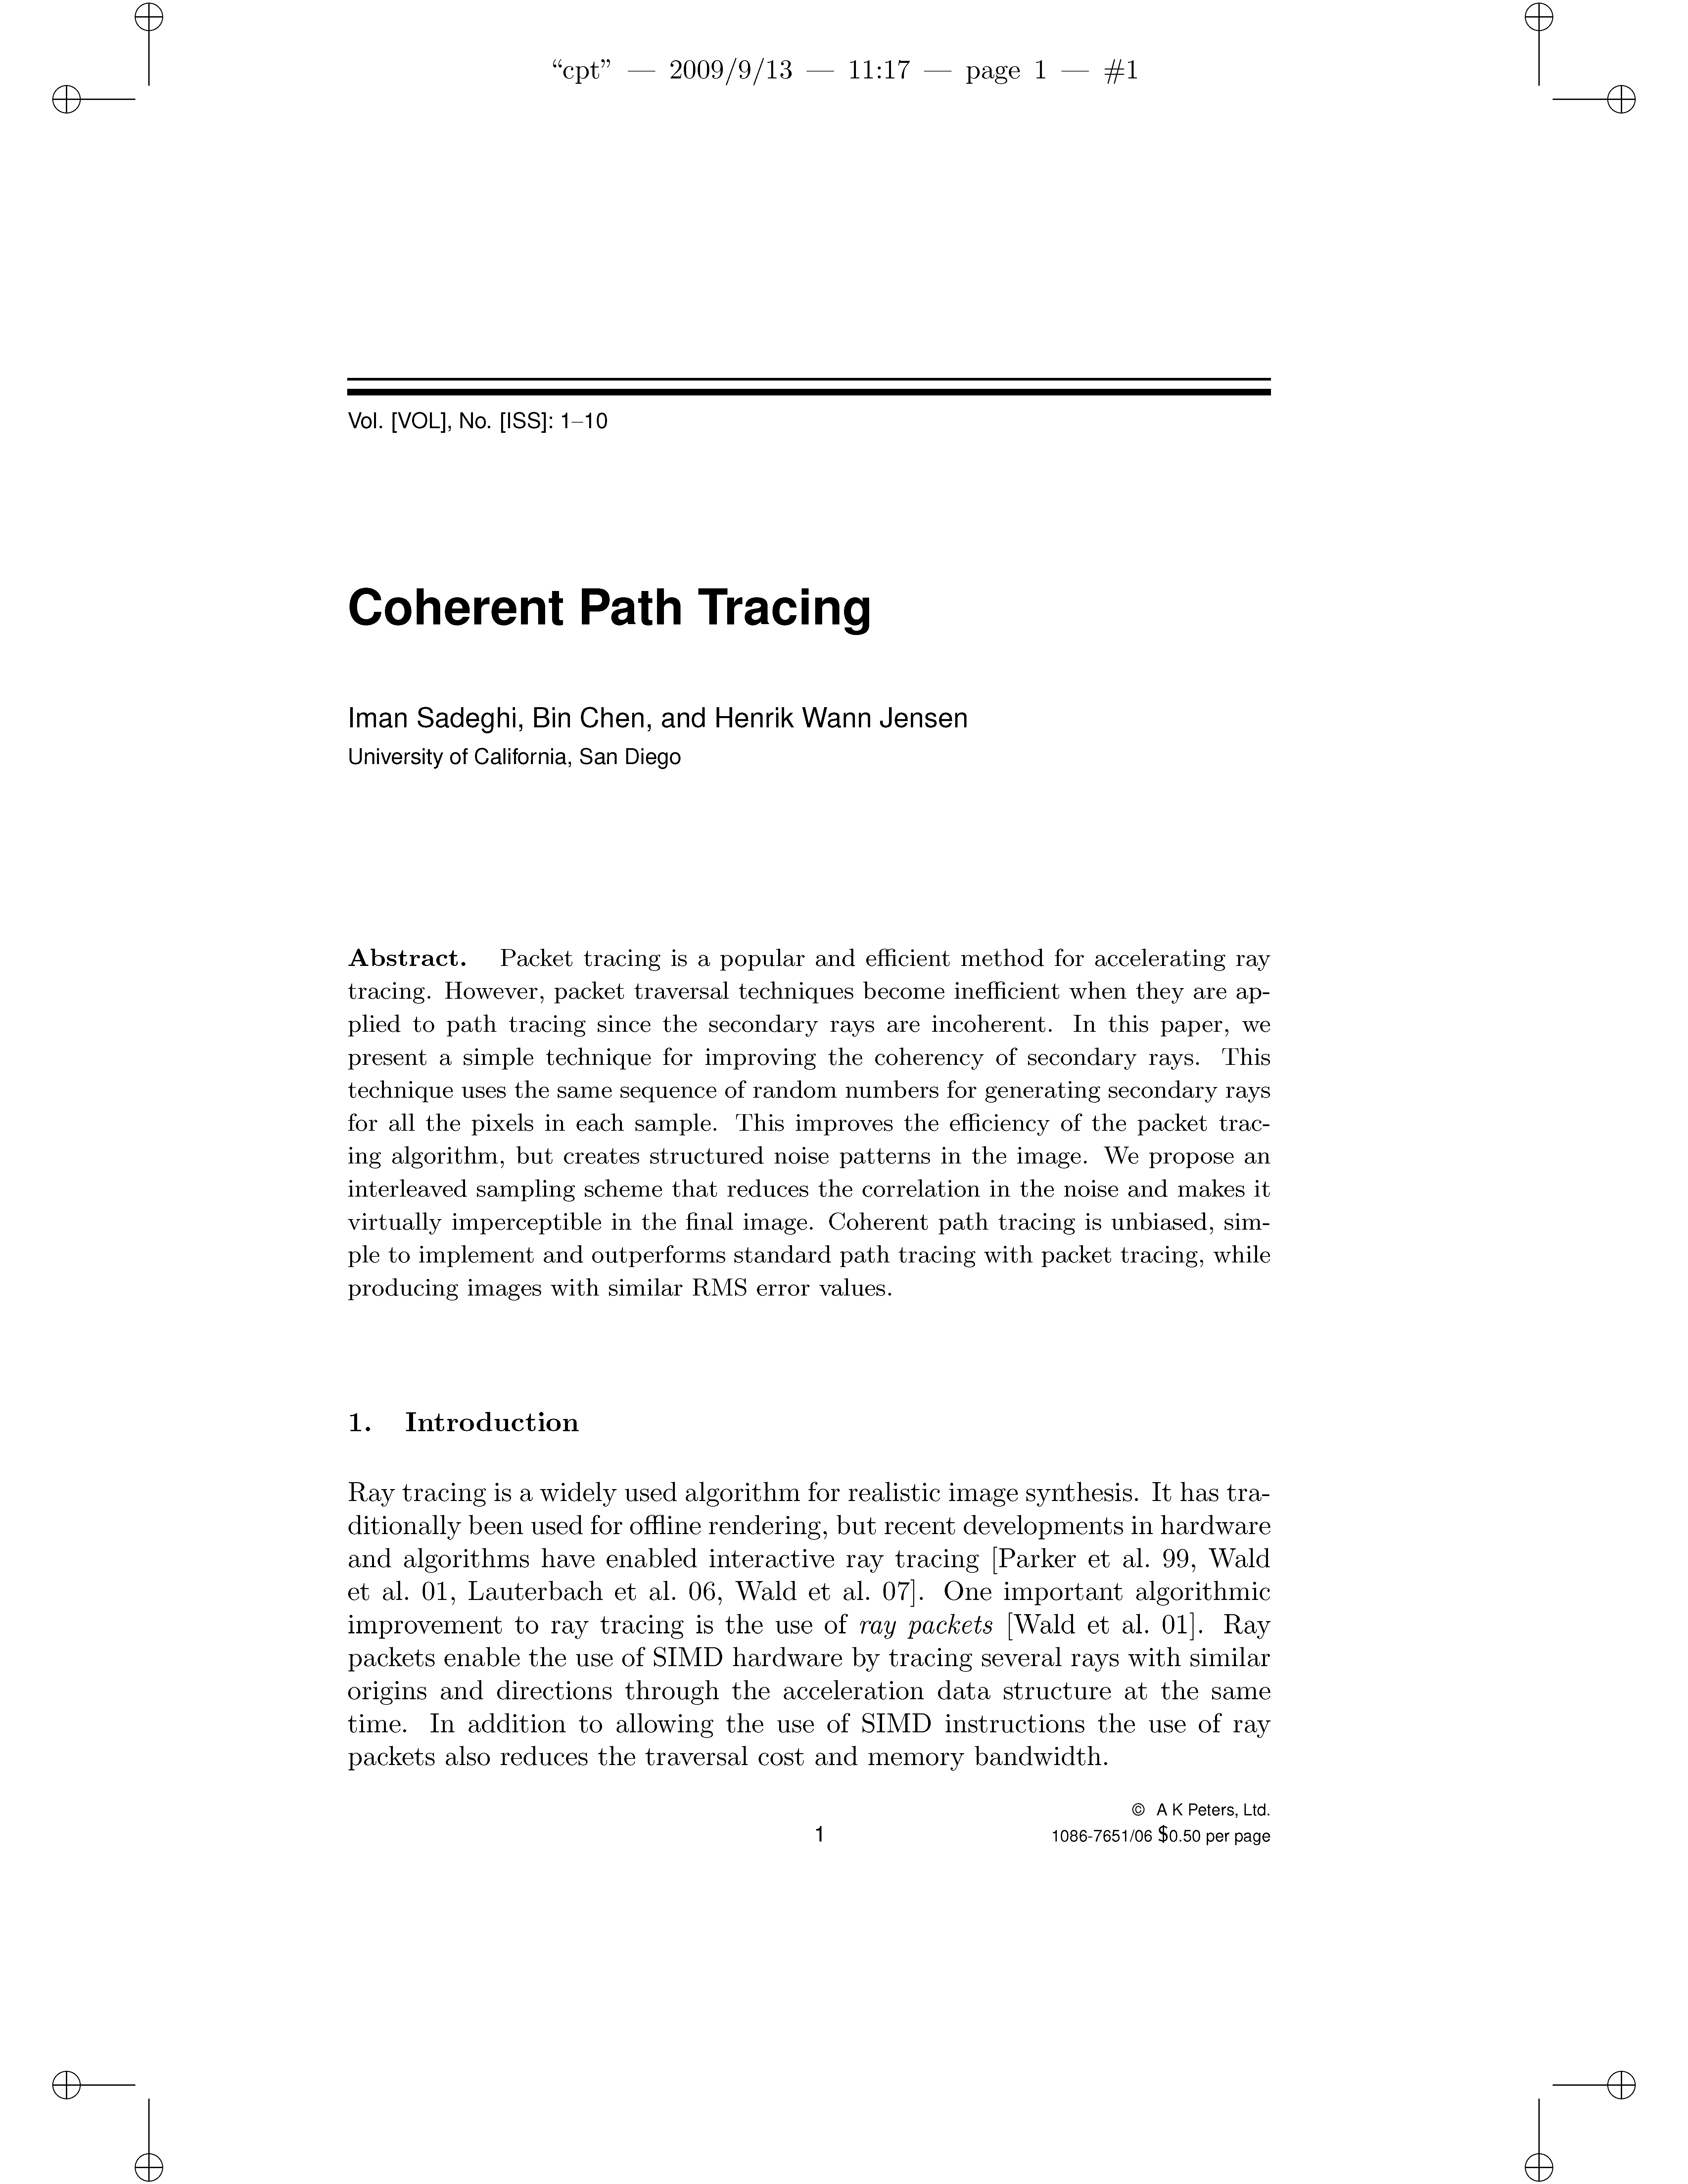 Coherent Path Tracing Page 1